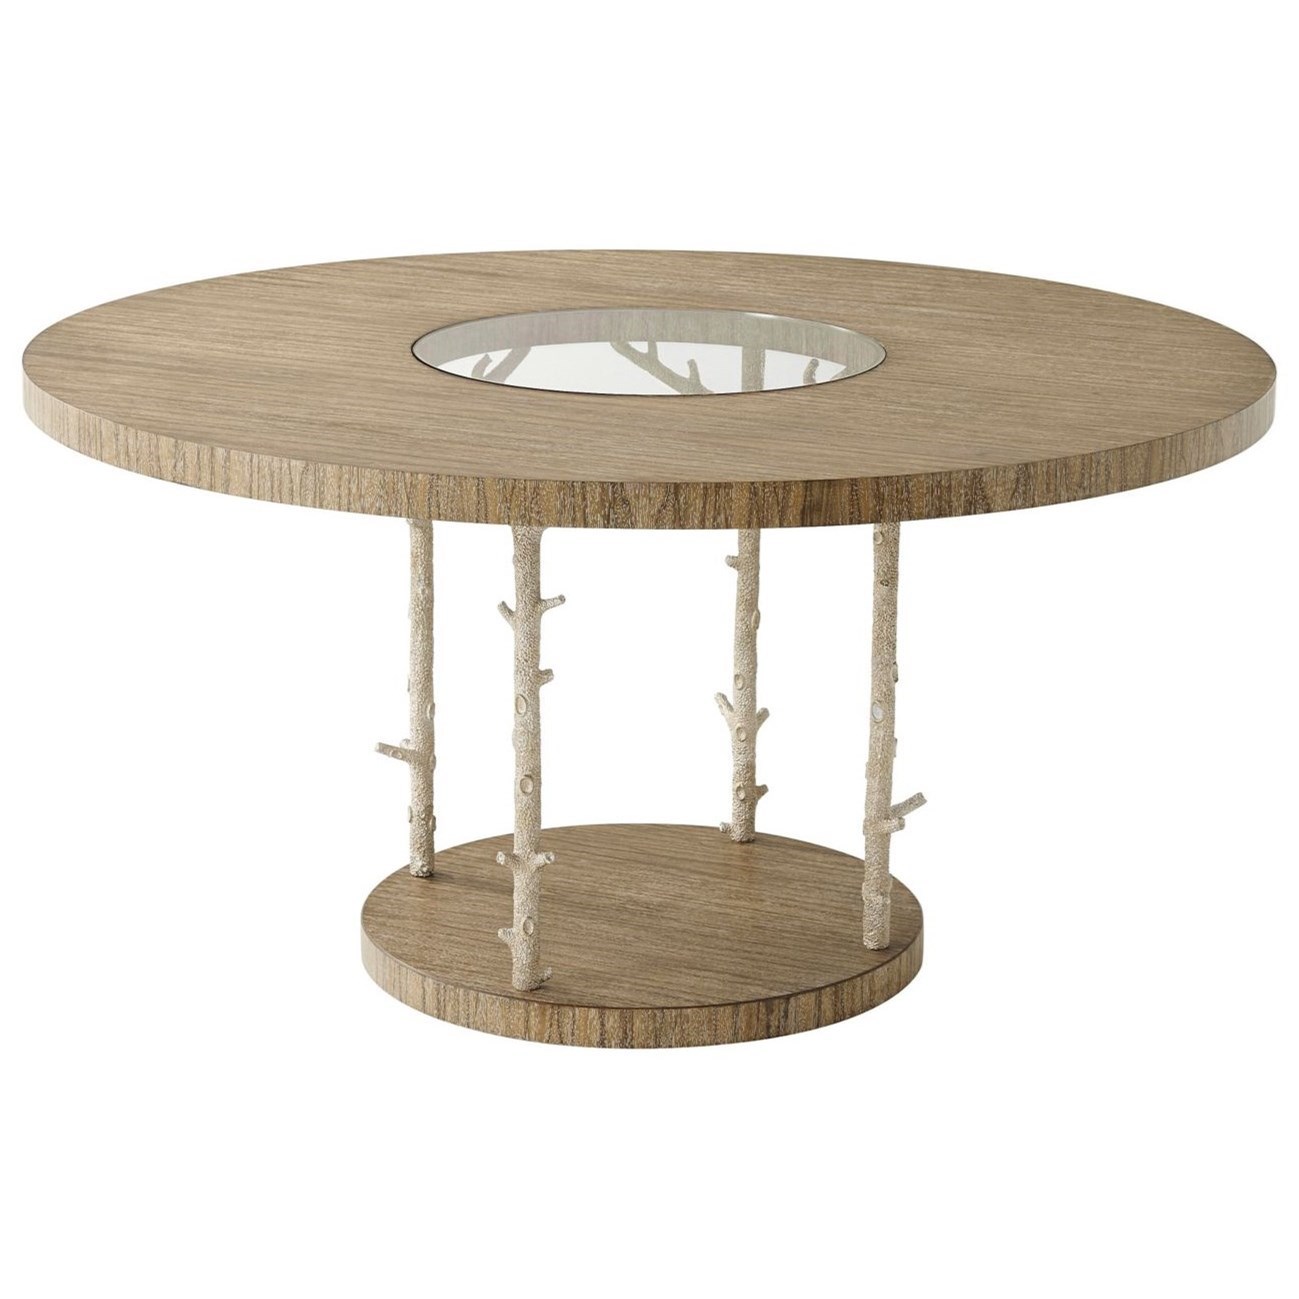 Wynwood II Round Dining Table with Coral Look Posts